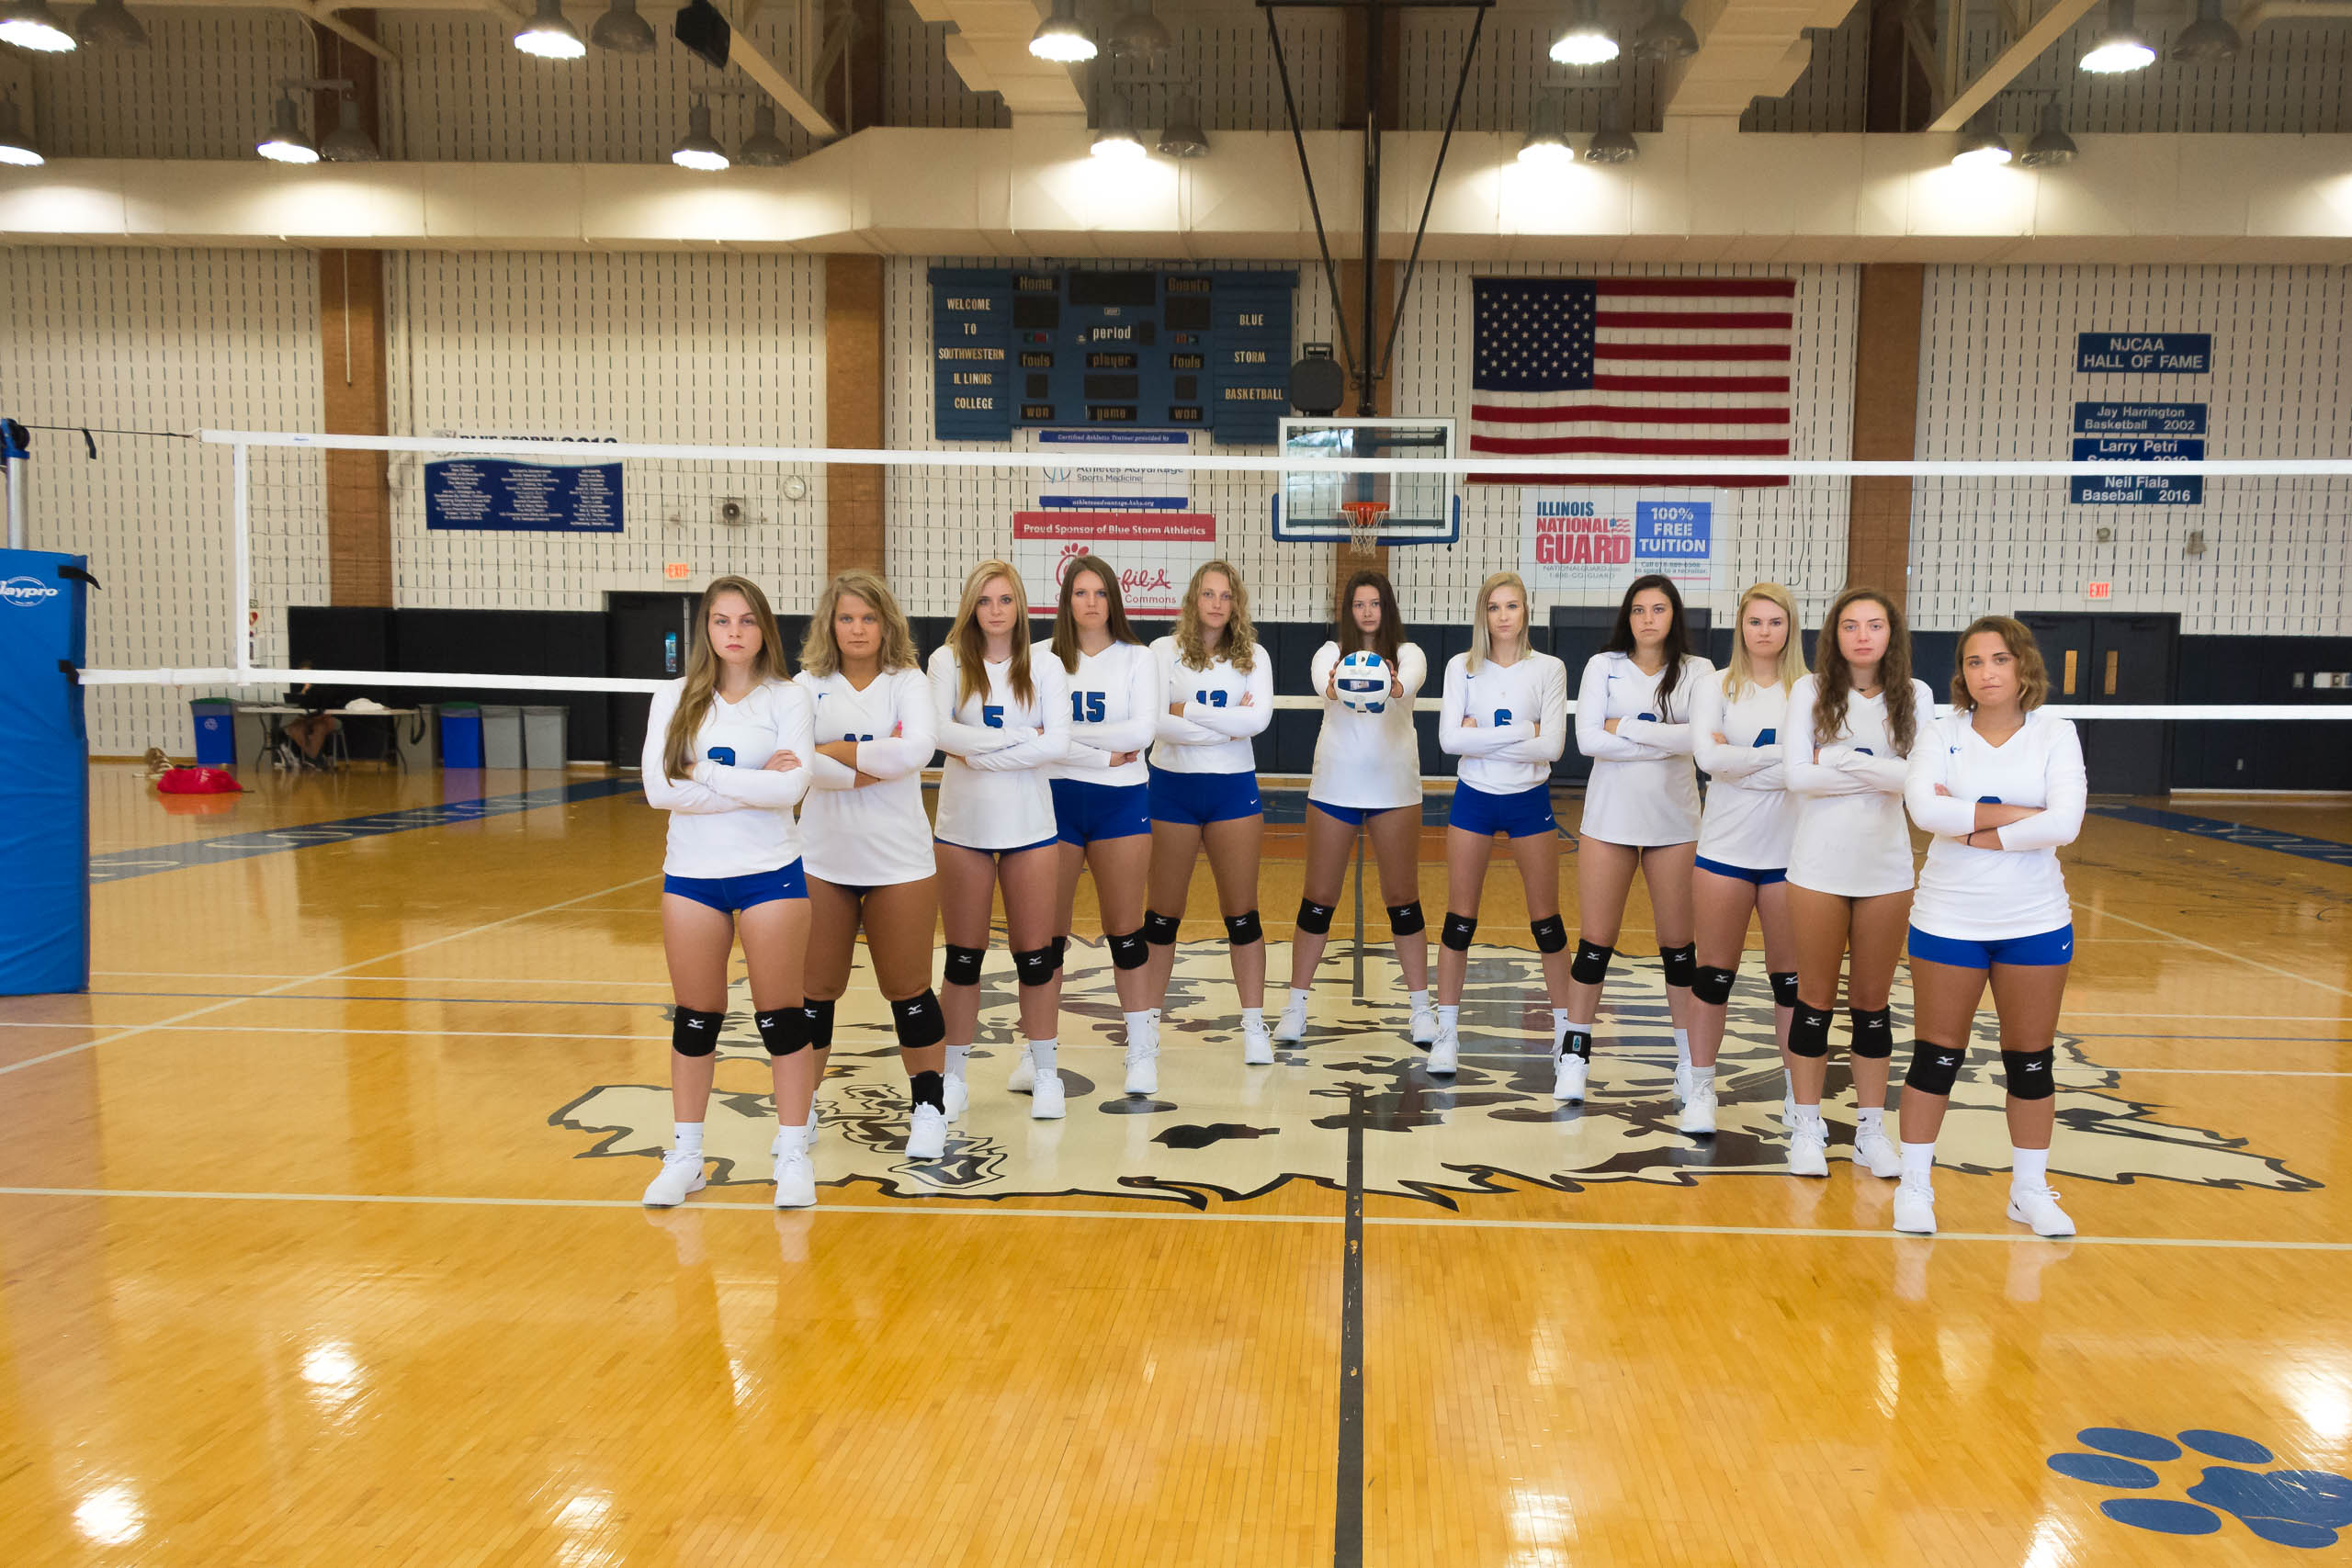 Womens Volleyball Roster Southwestern Illinois College